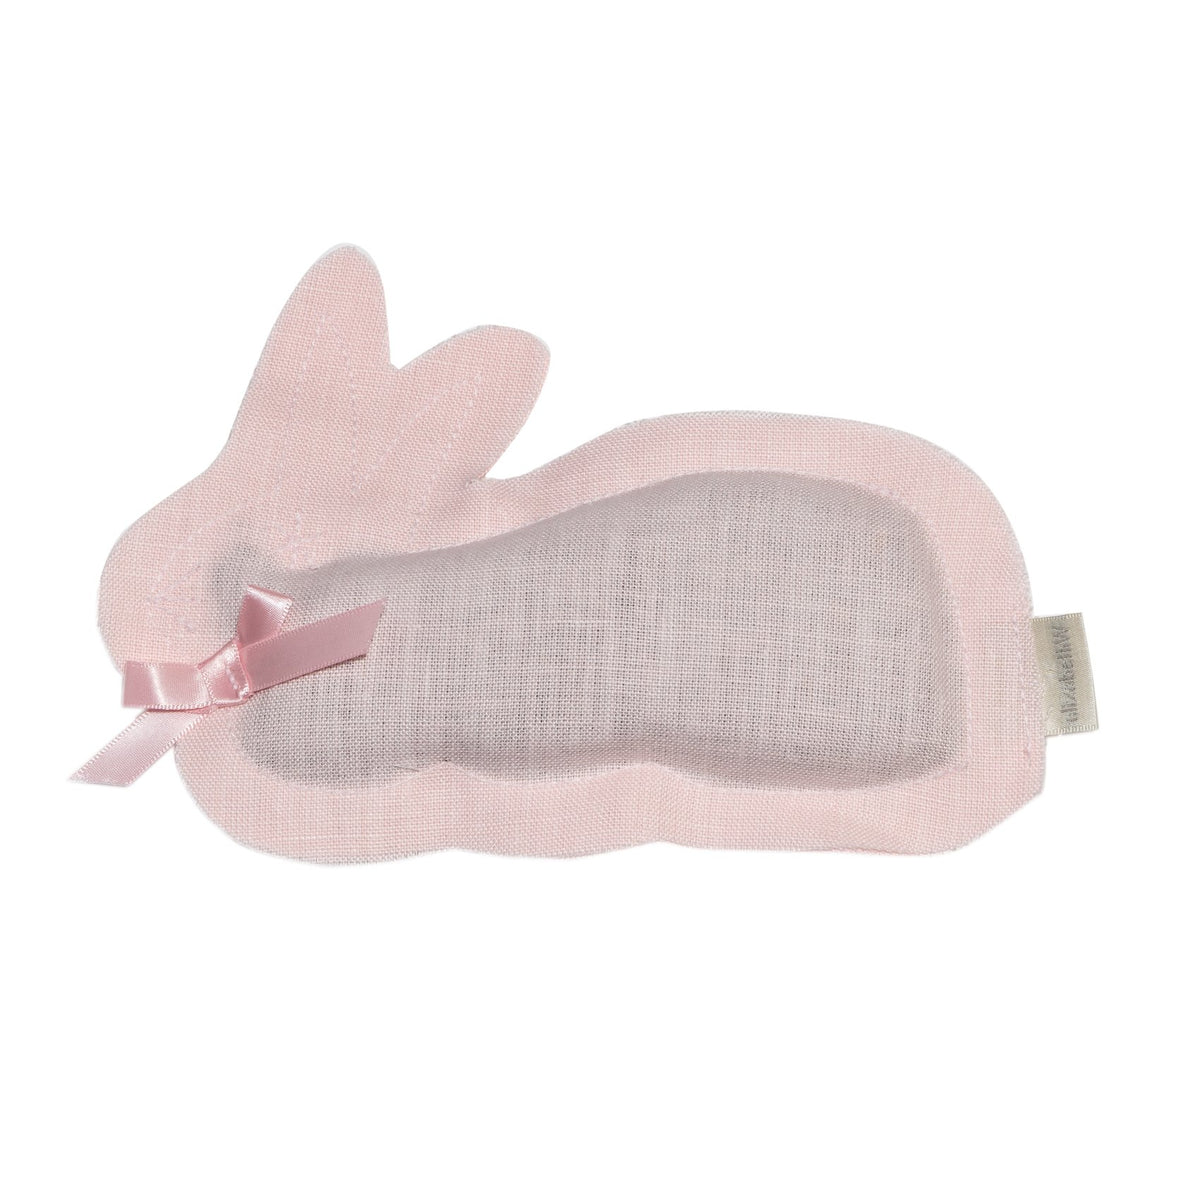 A pink sleeping eye mask designed like a bunny, with protruding ears and a decorative bow on one ear, infused with elizabeth W Lavender Bunny Sachet - Pink aroma, isolated on a white background.